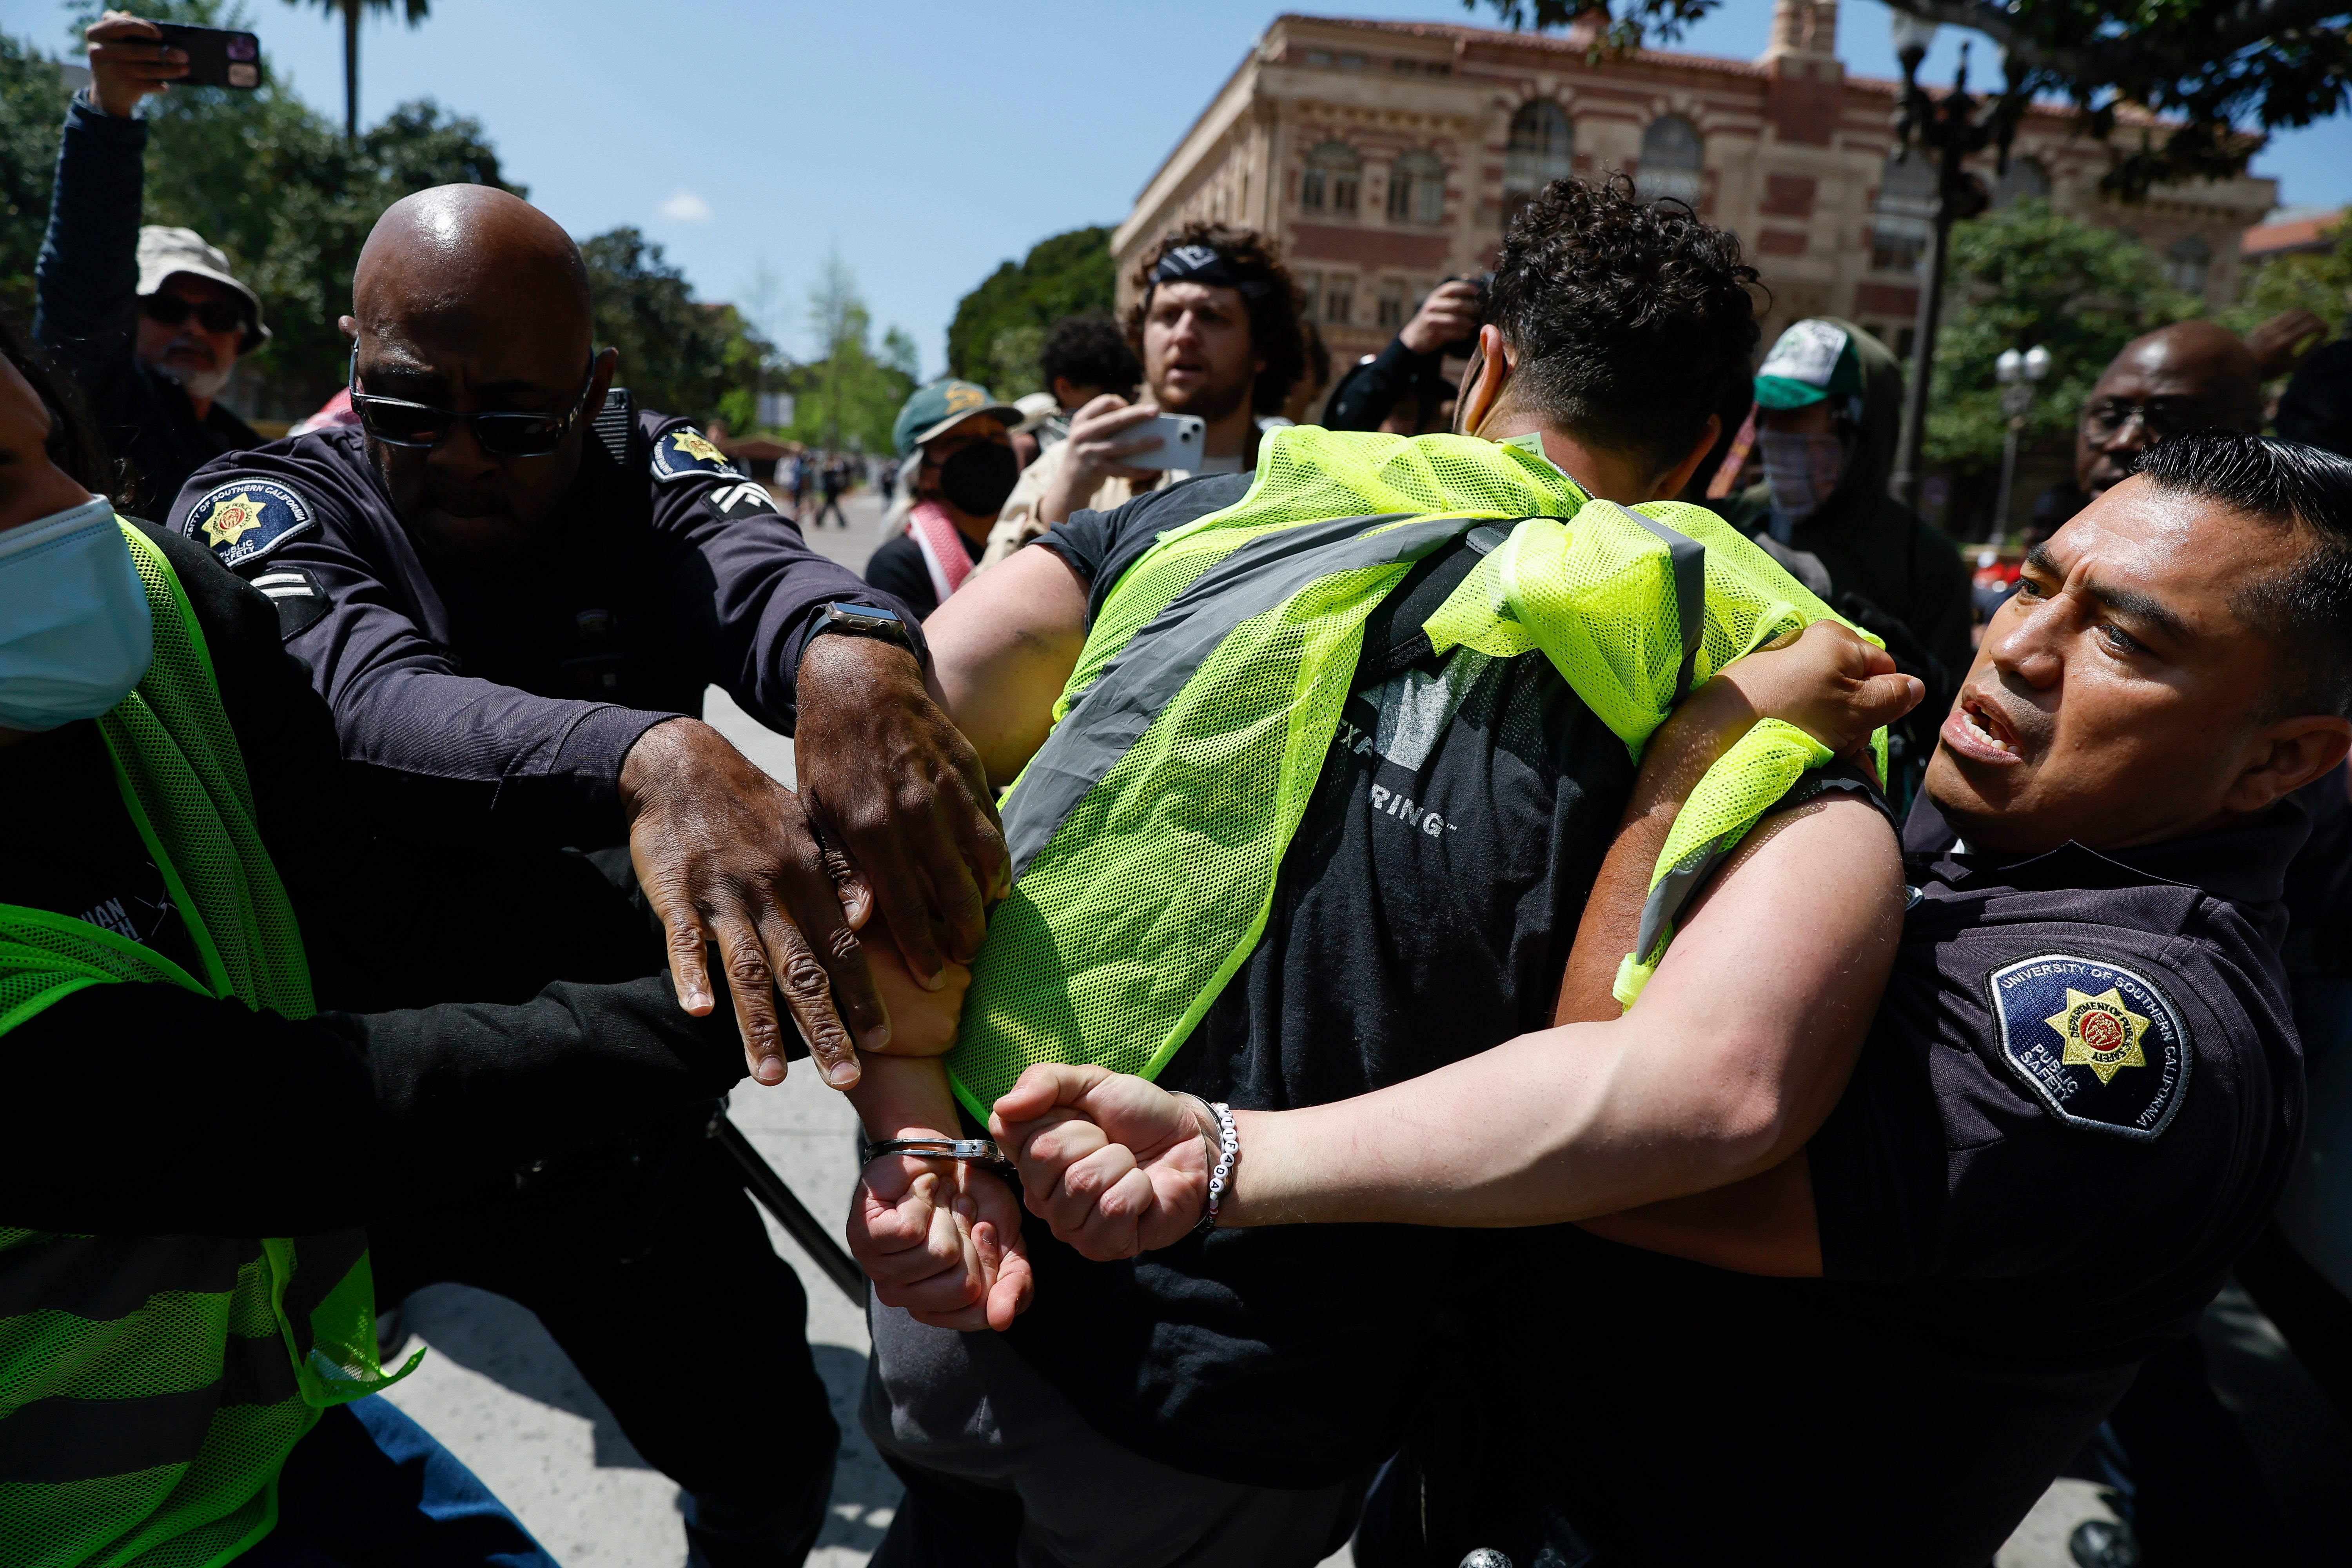 A protester is detained at California’s USC